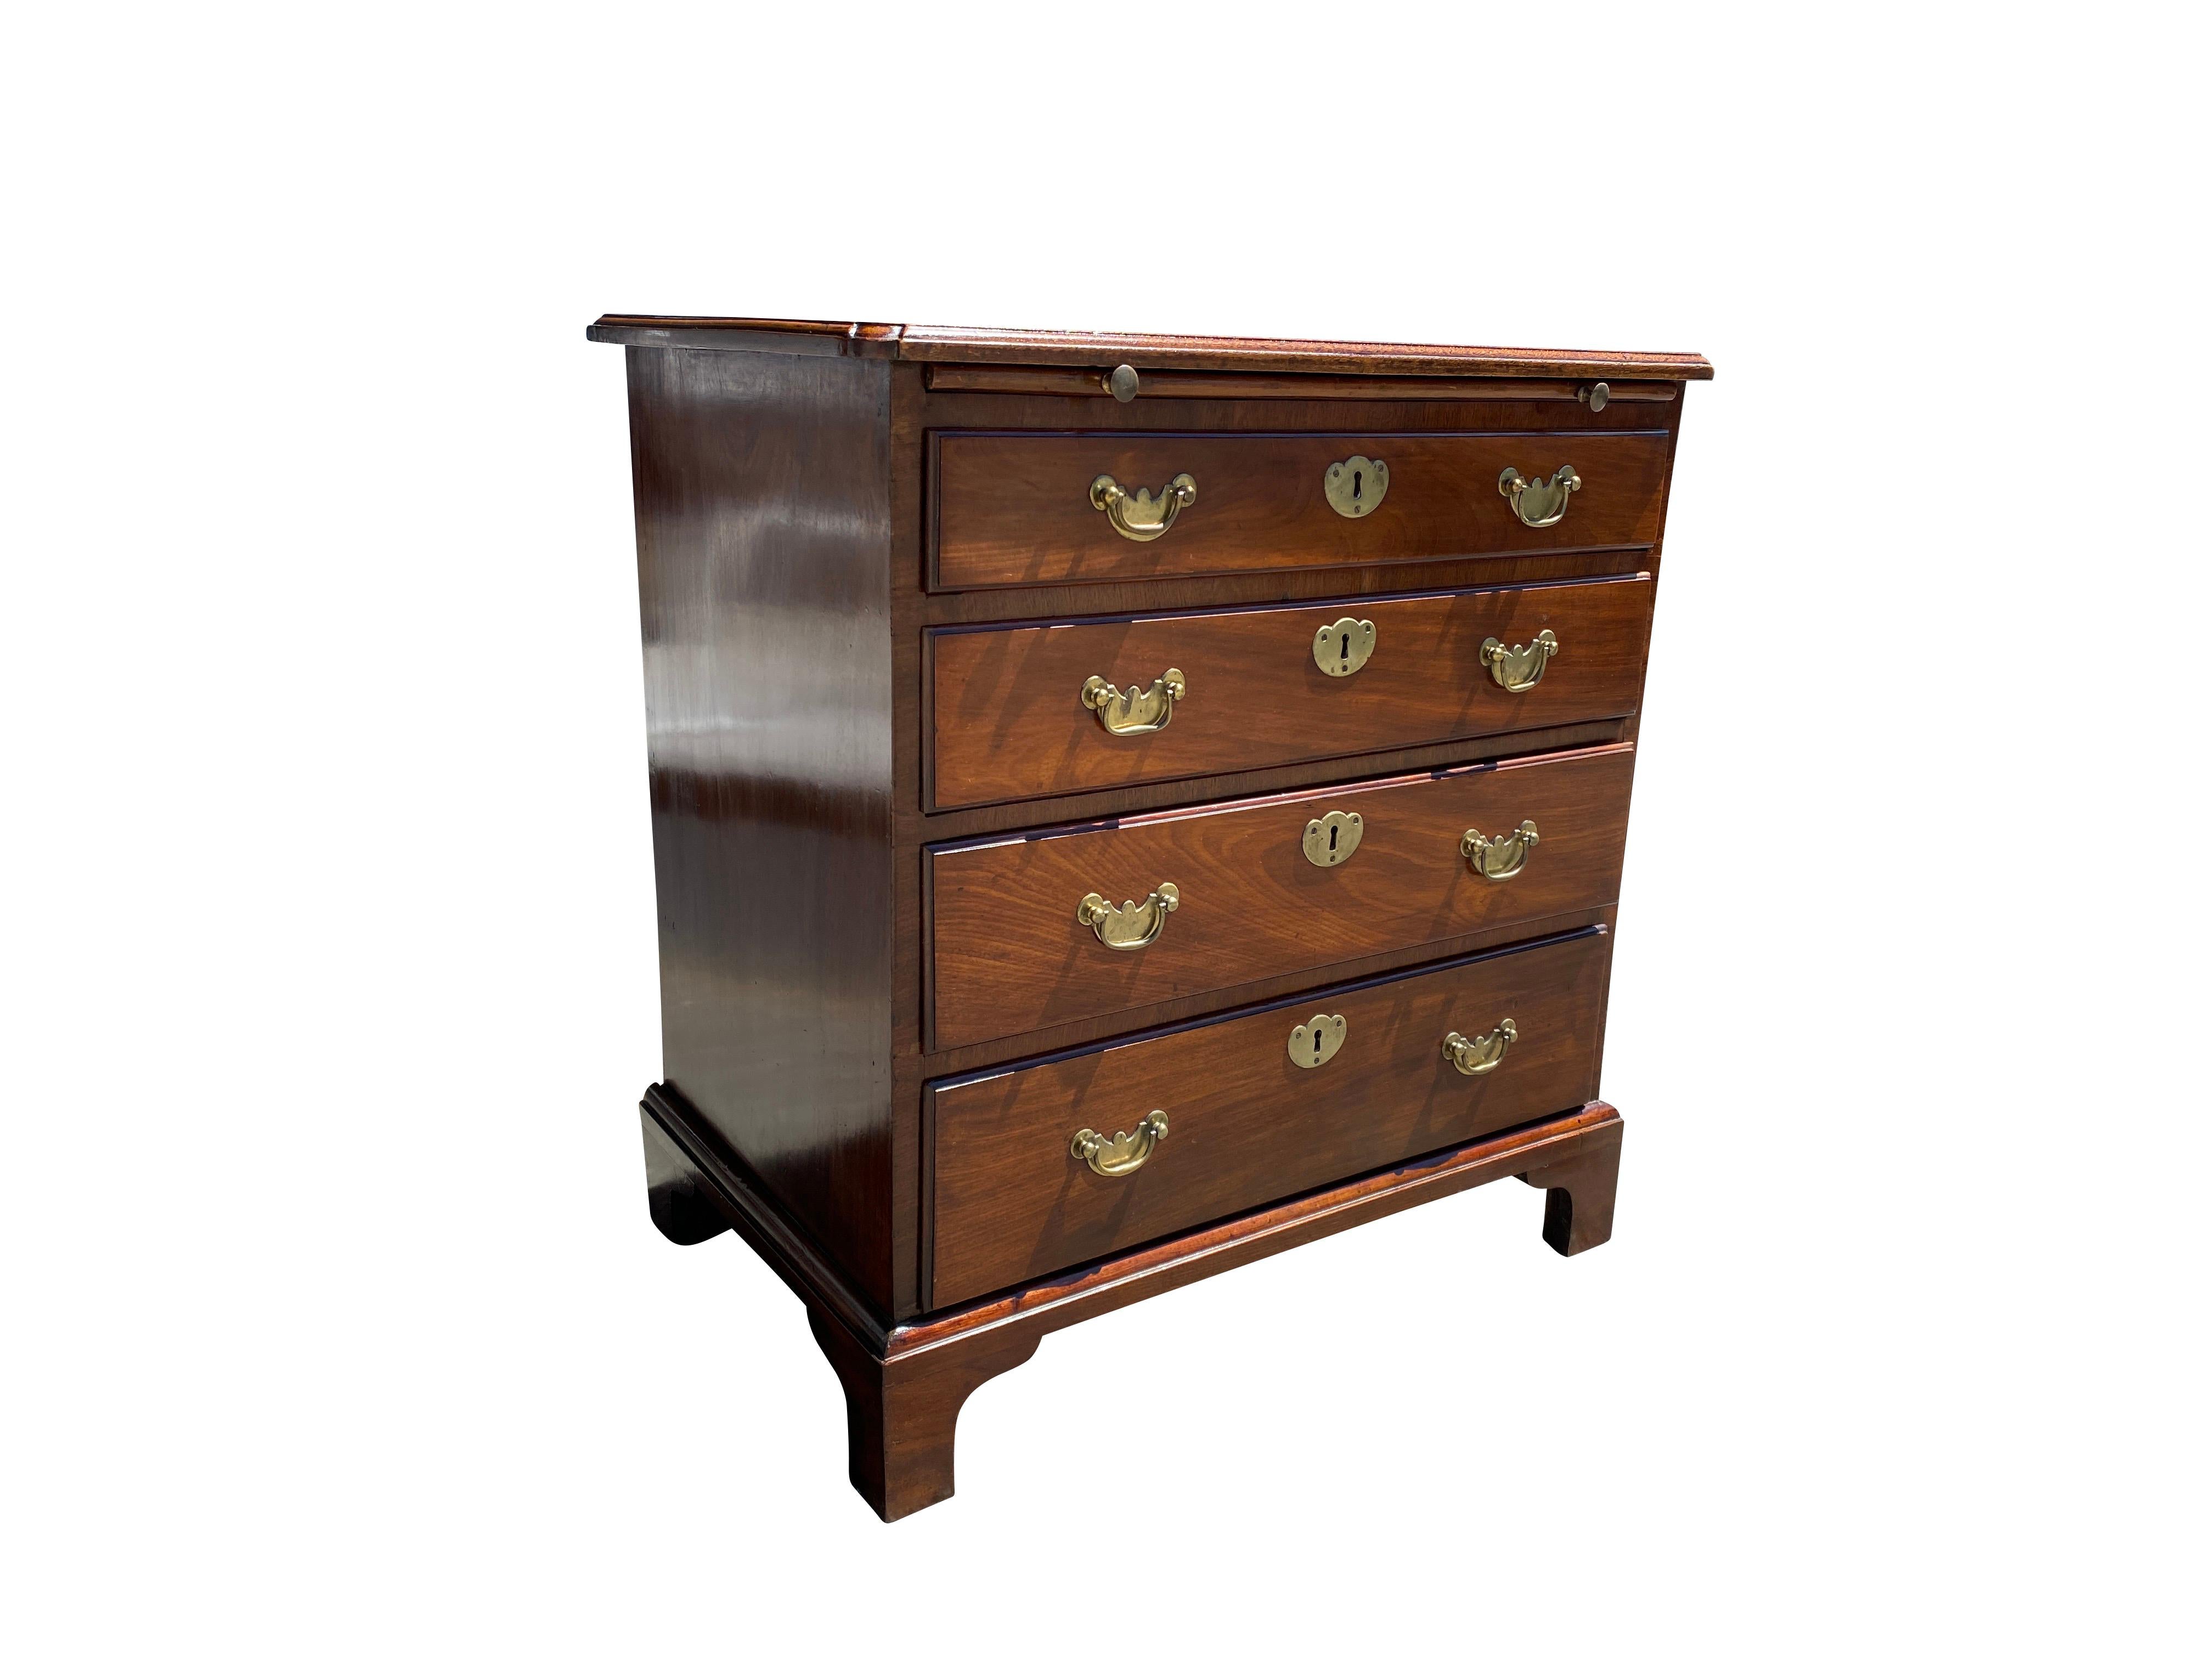 Rectangular top with molded corners and edge, with brushing slide over four graduated drawers. Brass bail handles. Bracket feet.